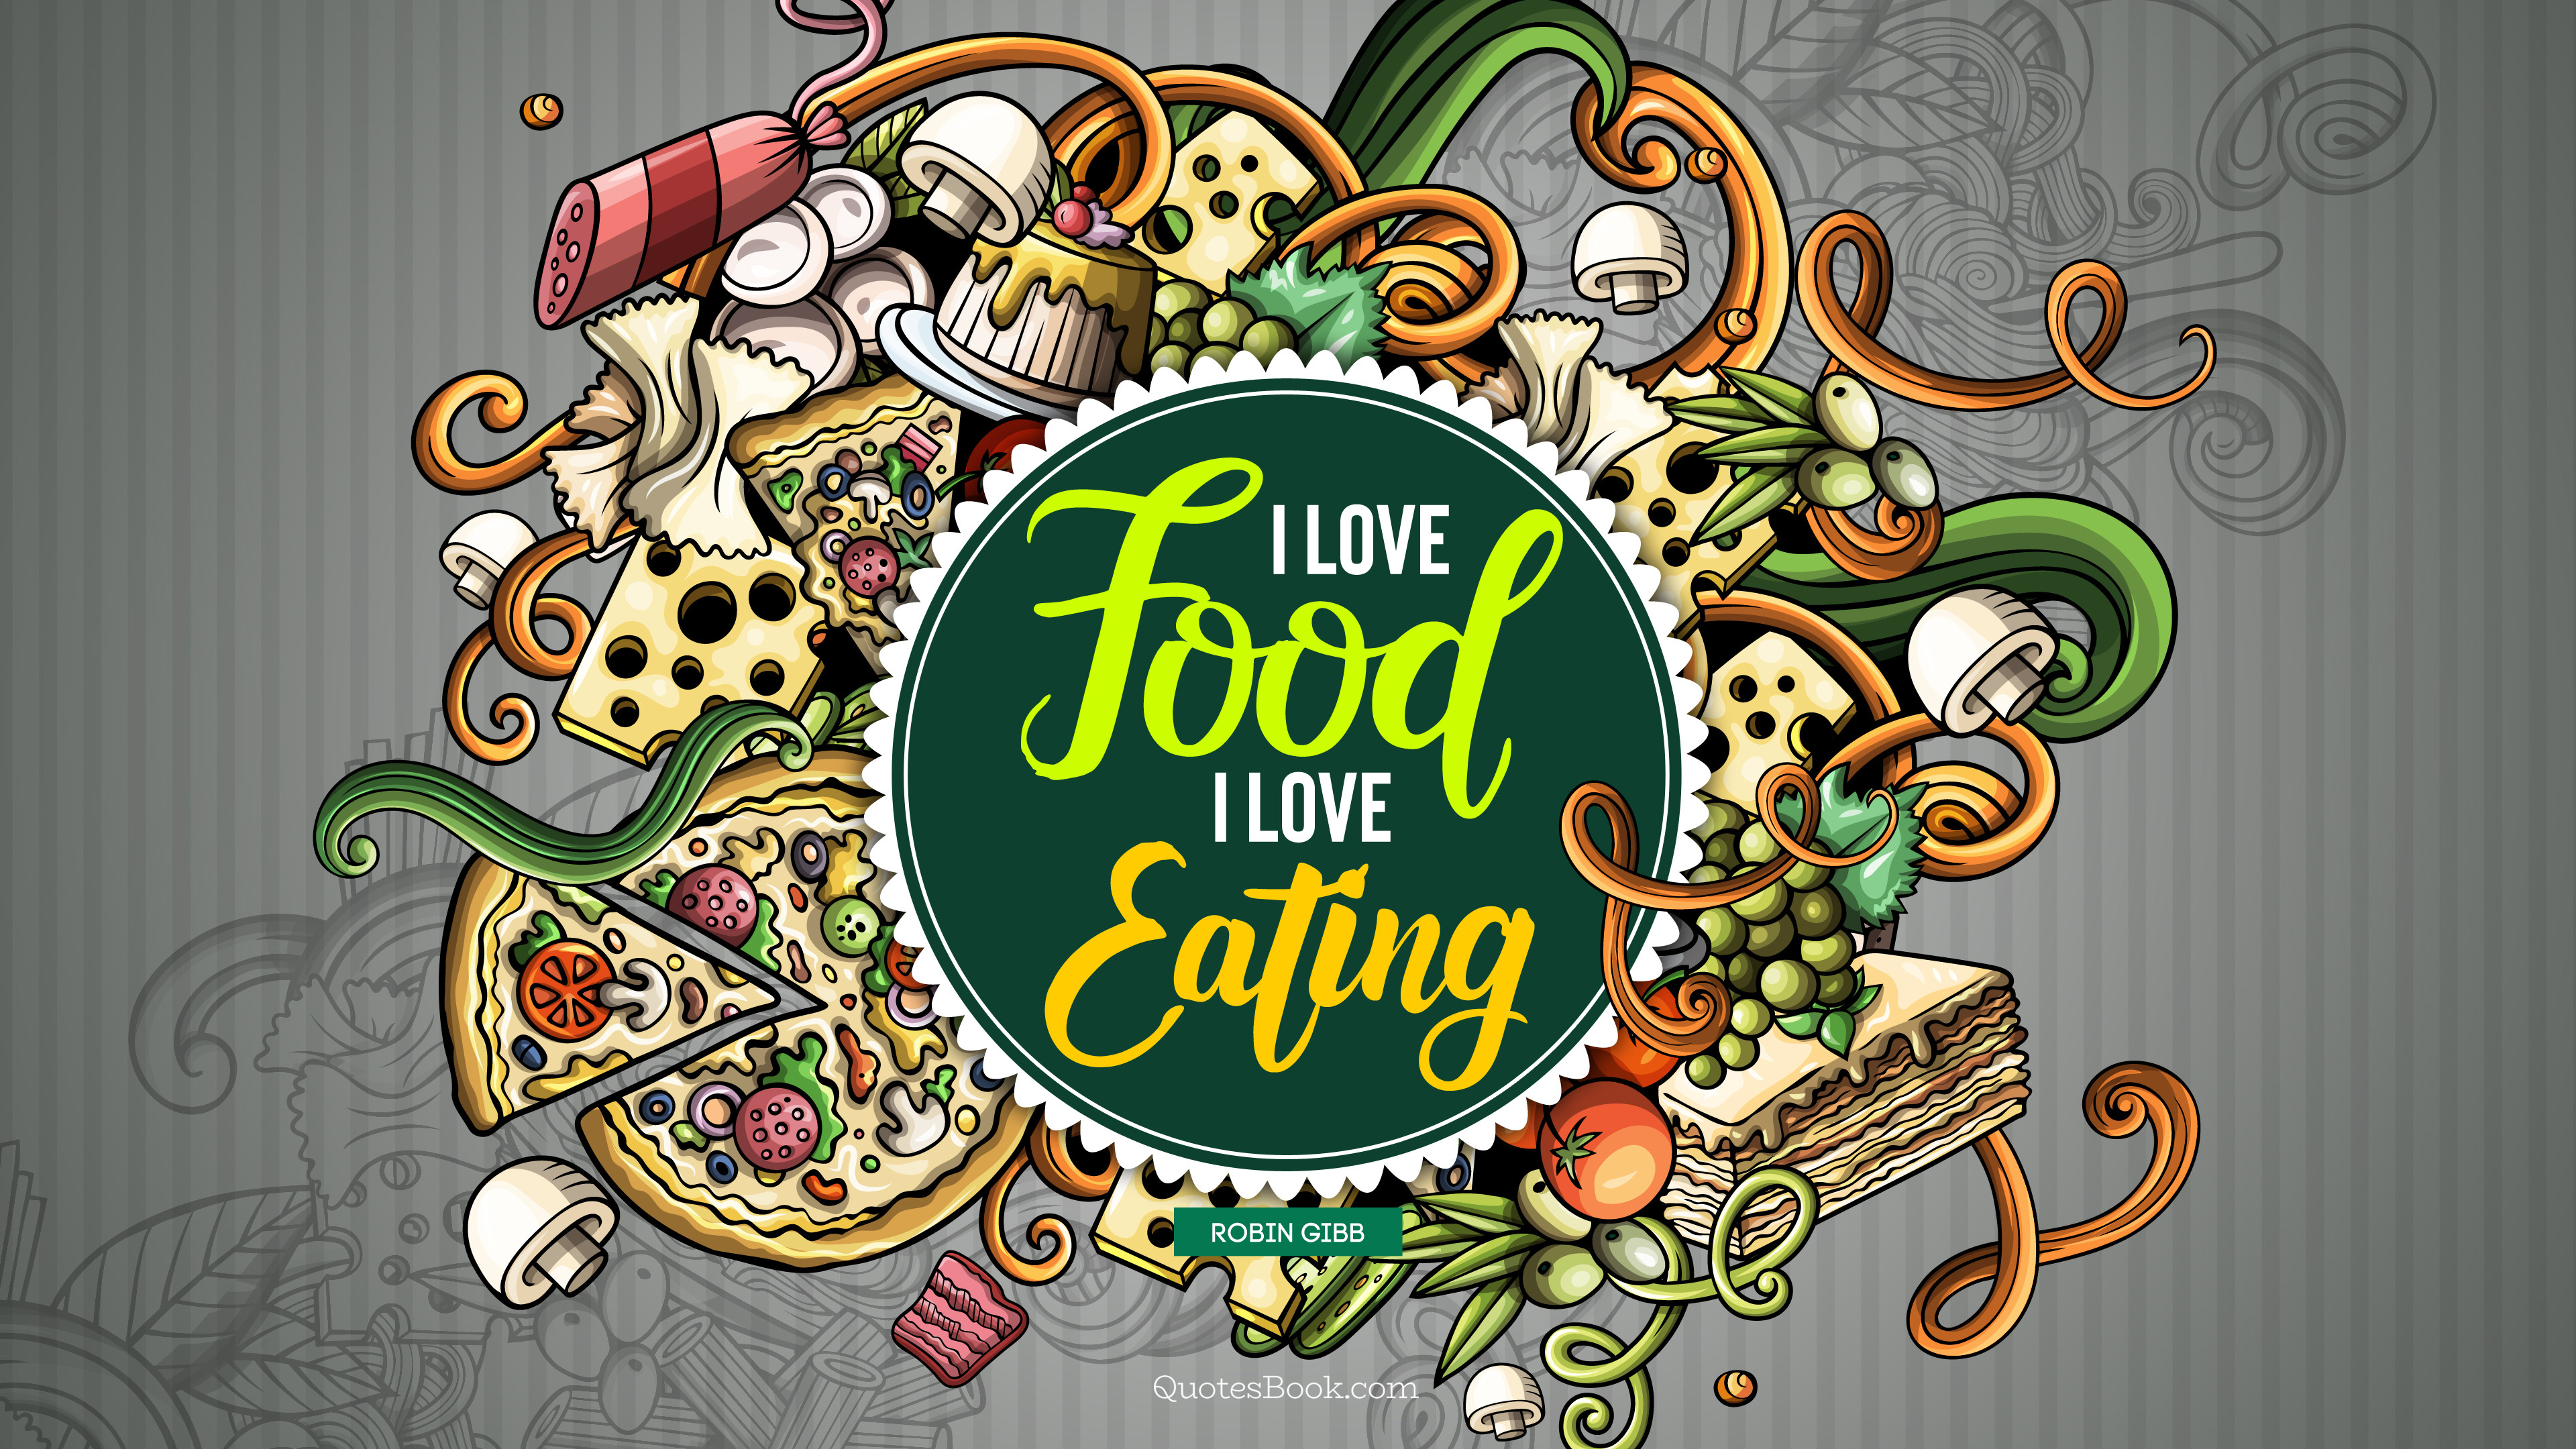 I love food, I love eating. Quote by Robin Gibb QuotesBook